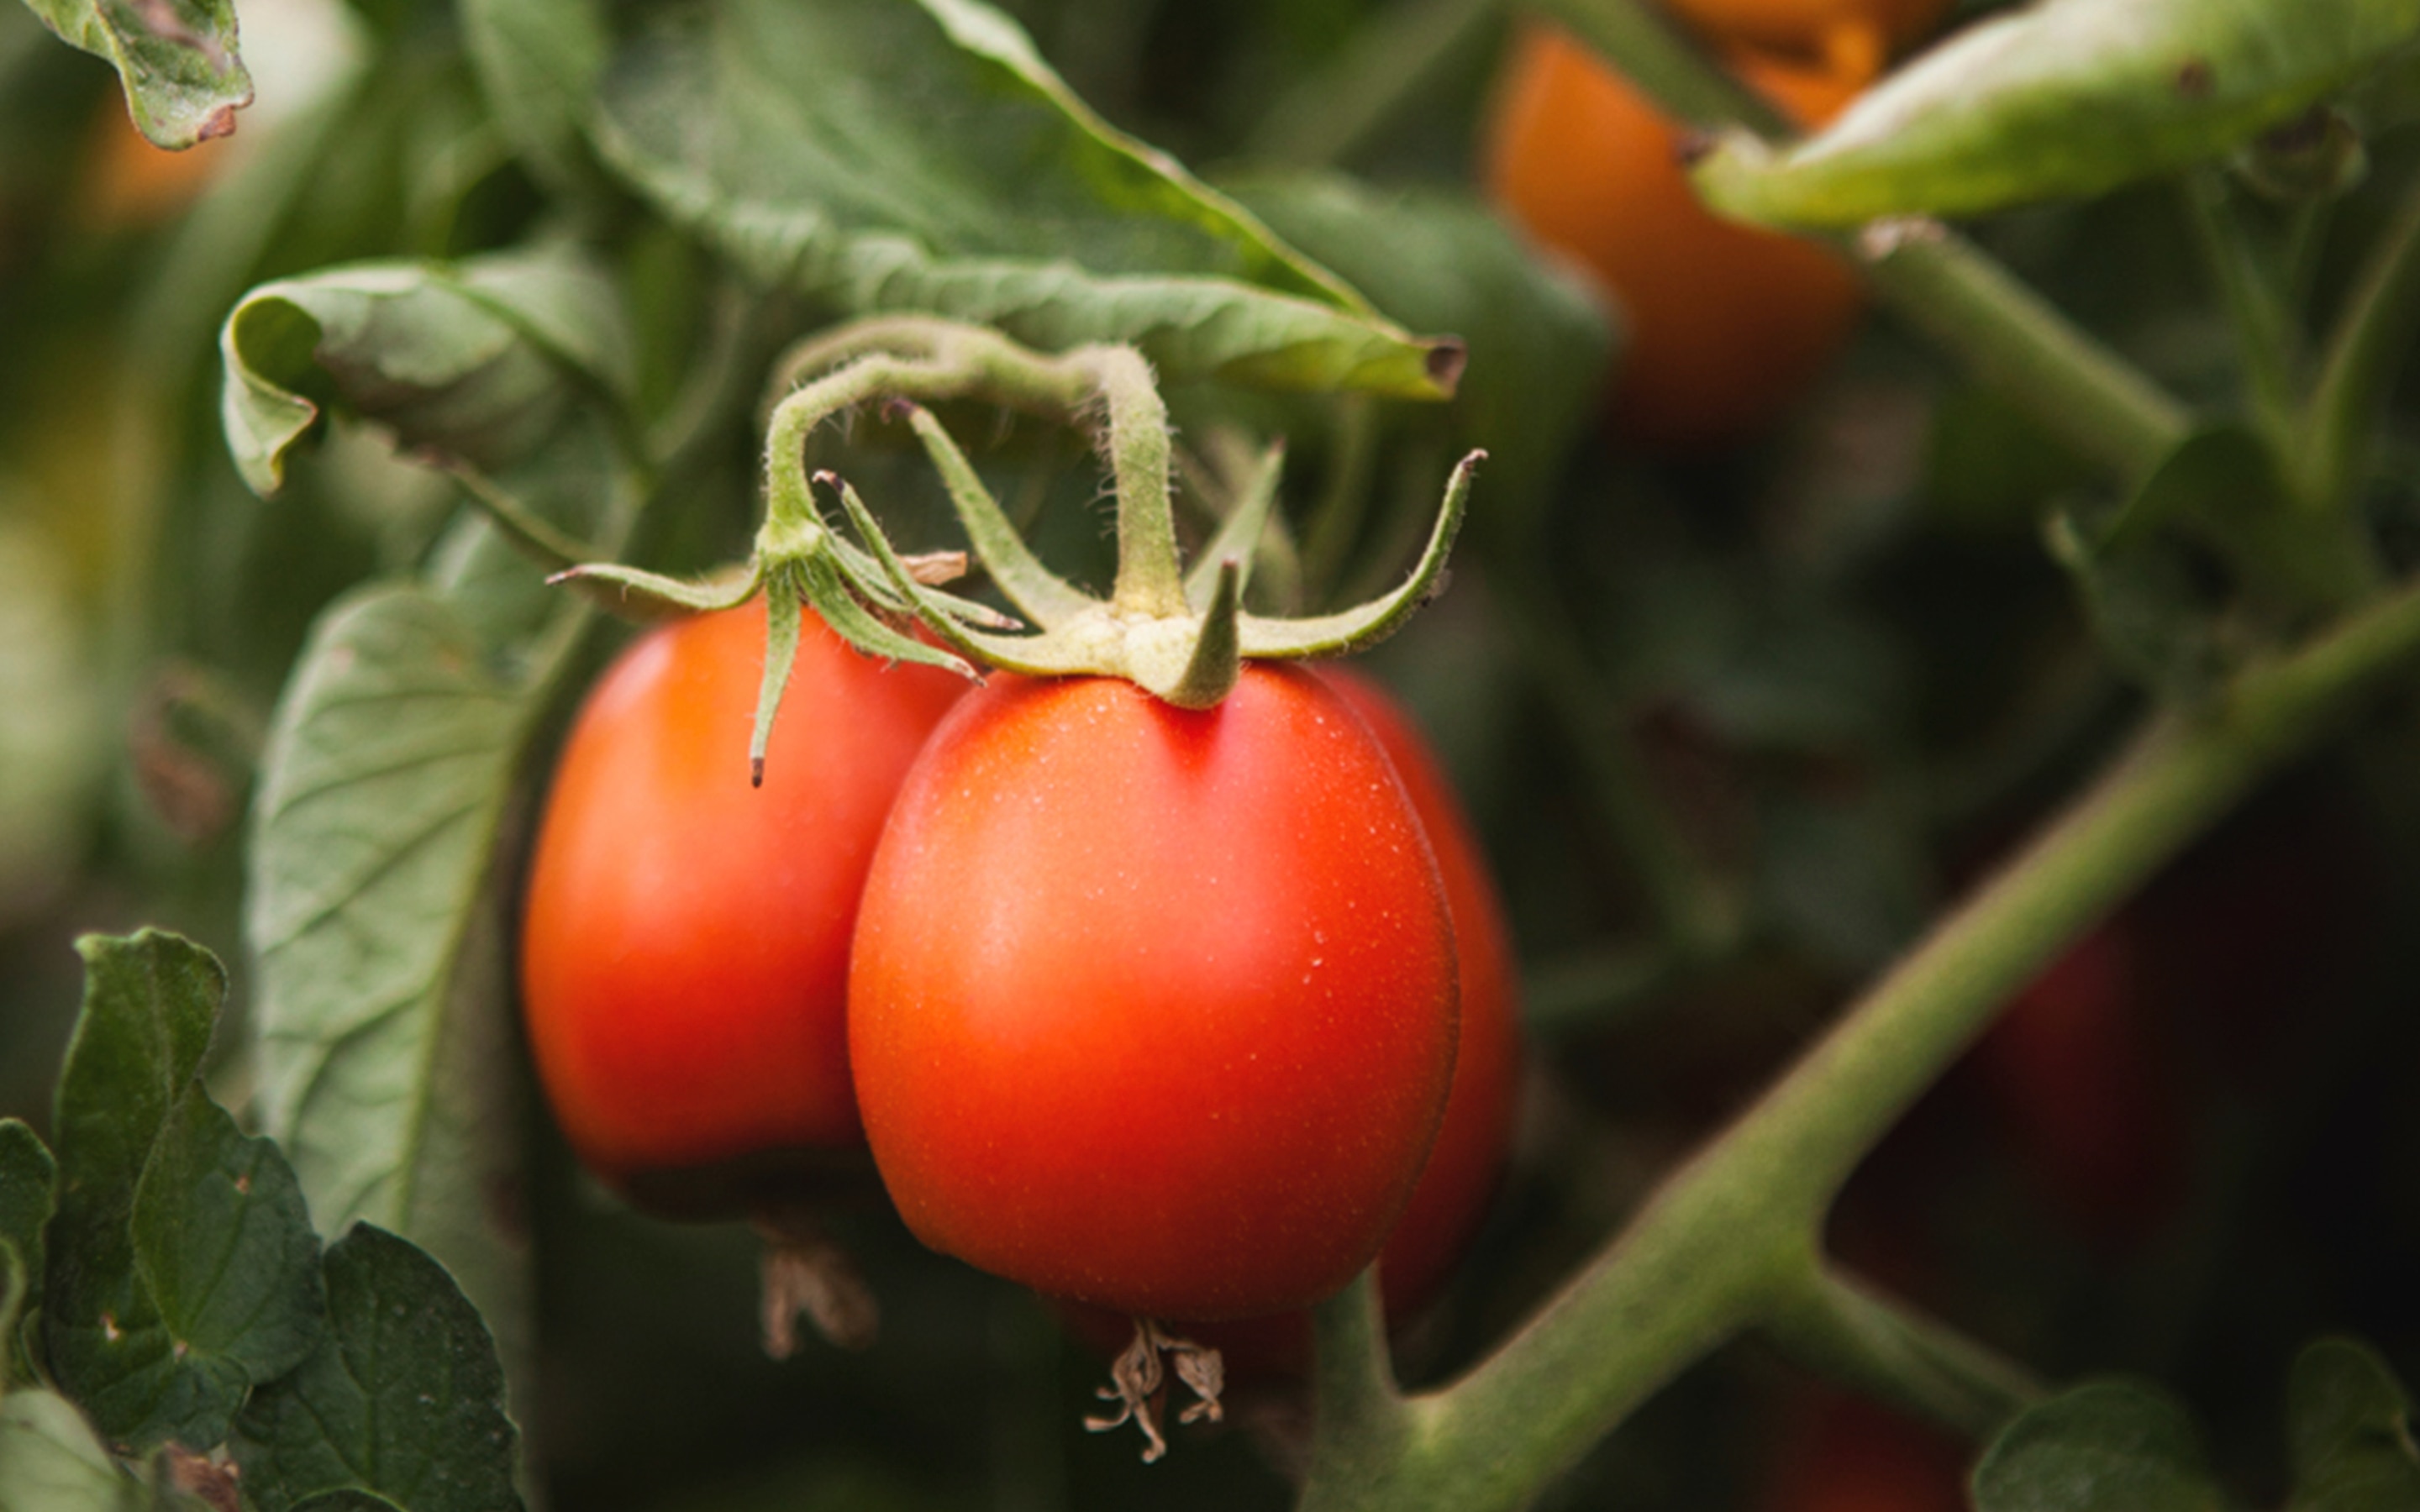 Sustainably grown tomatoes